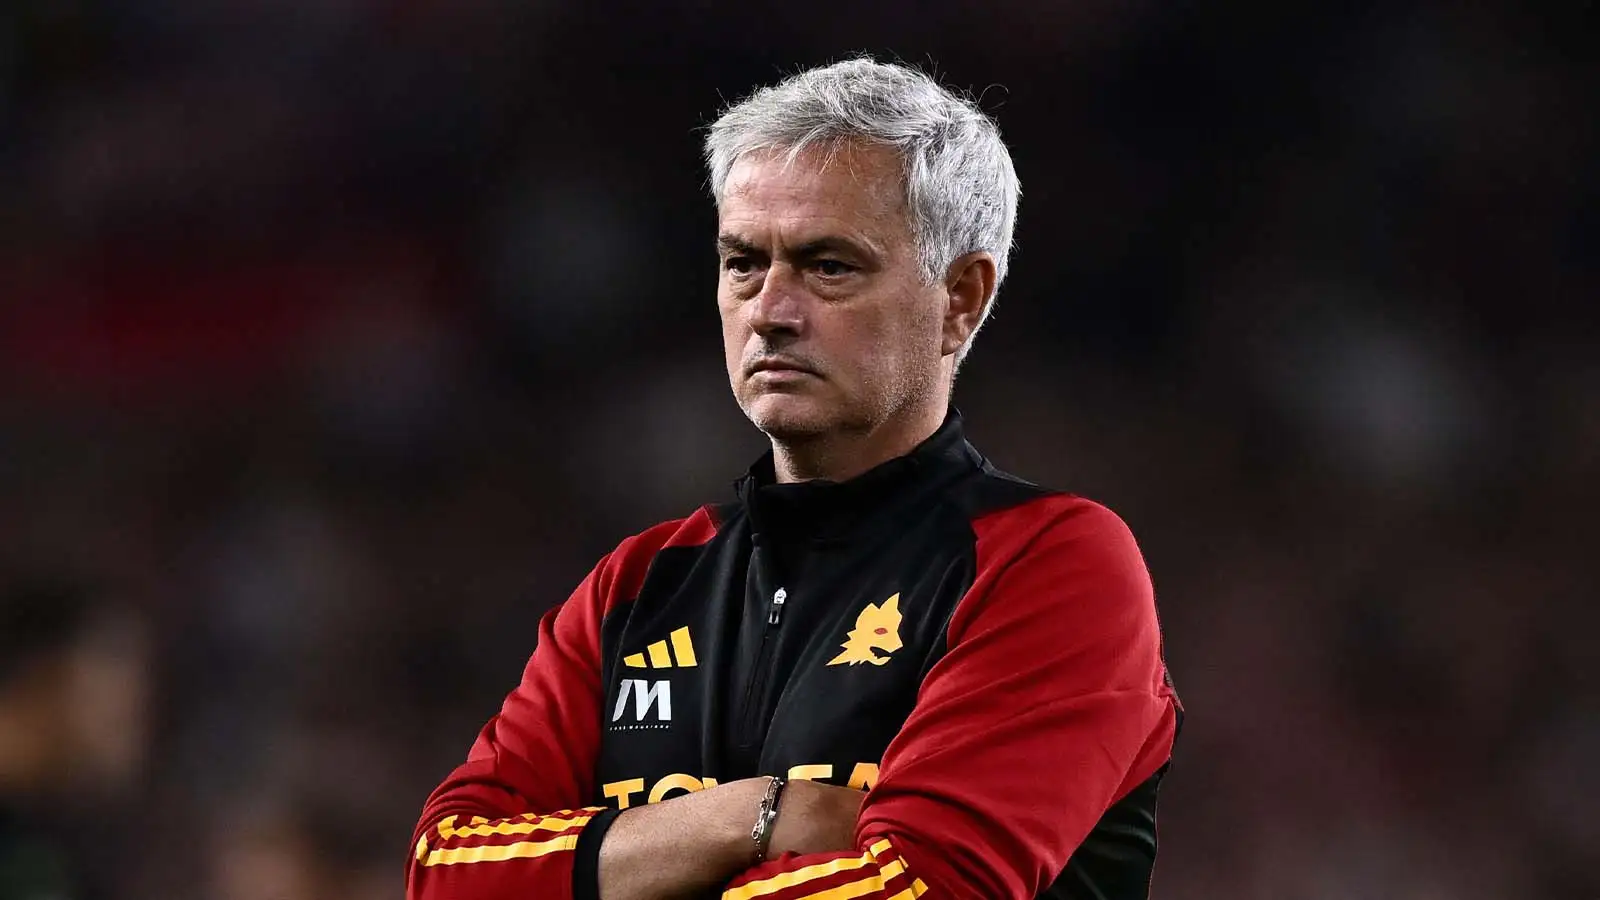 Jose Mourinho sacked: How much Roma, Chelsea, Man Utd & Real Madrid paid to get rid